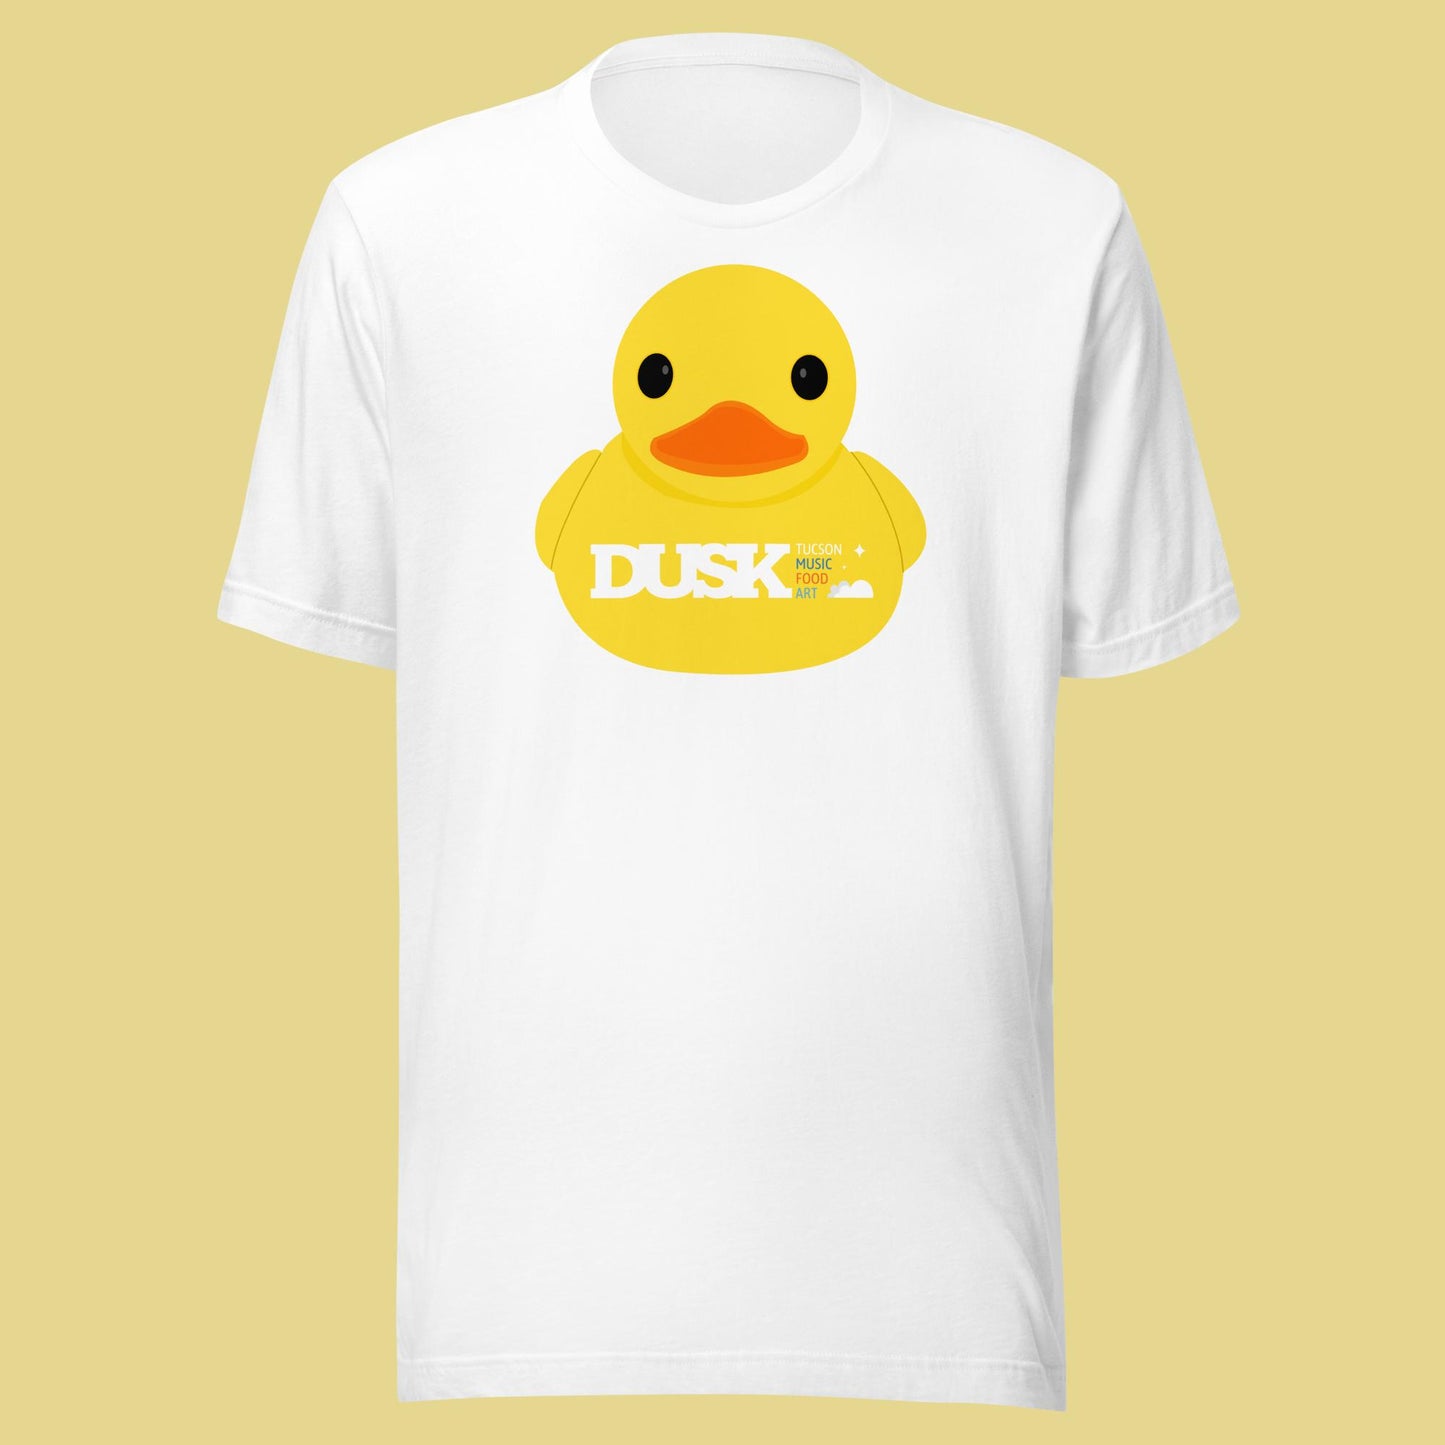 Rubber Duckie, You're the One - Unisex T-Shirt